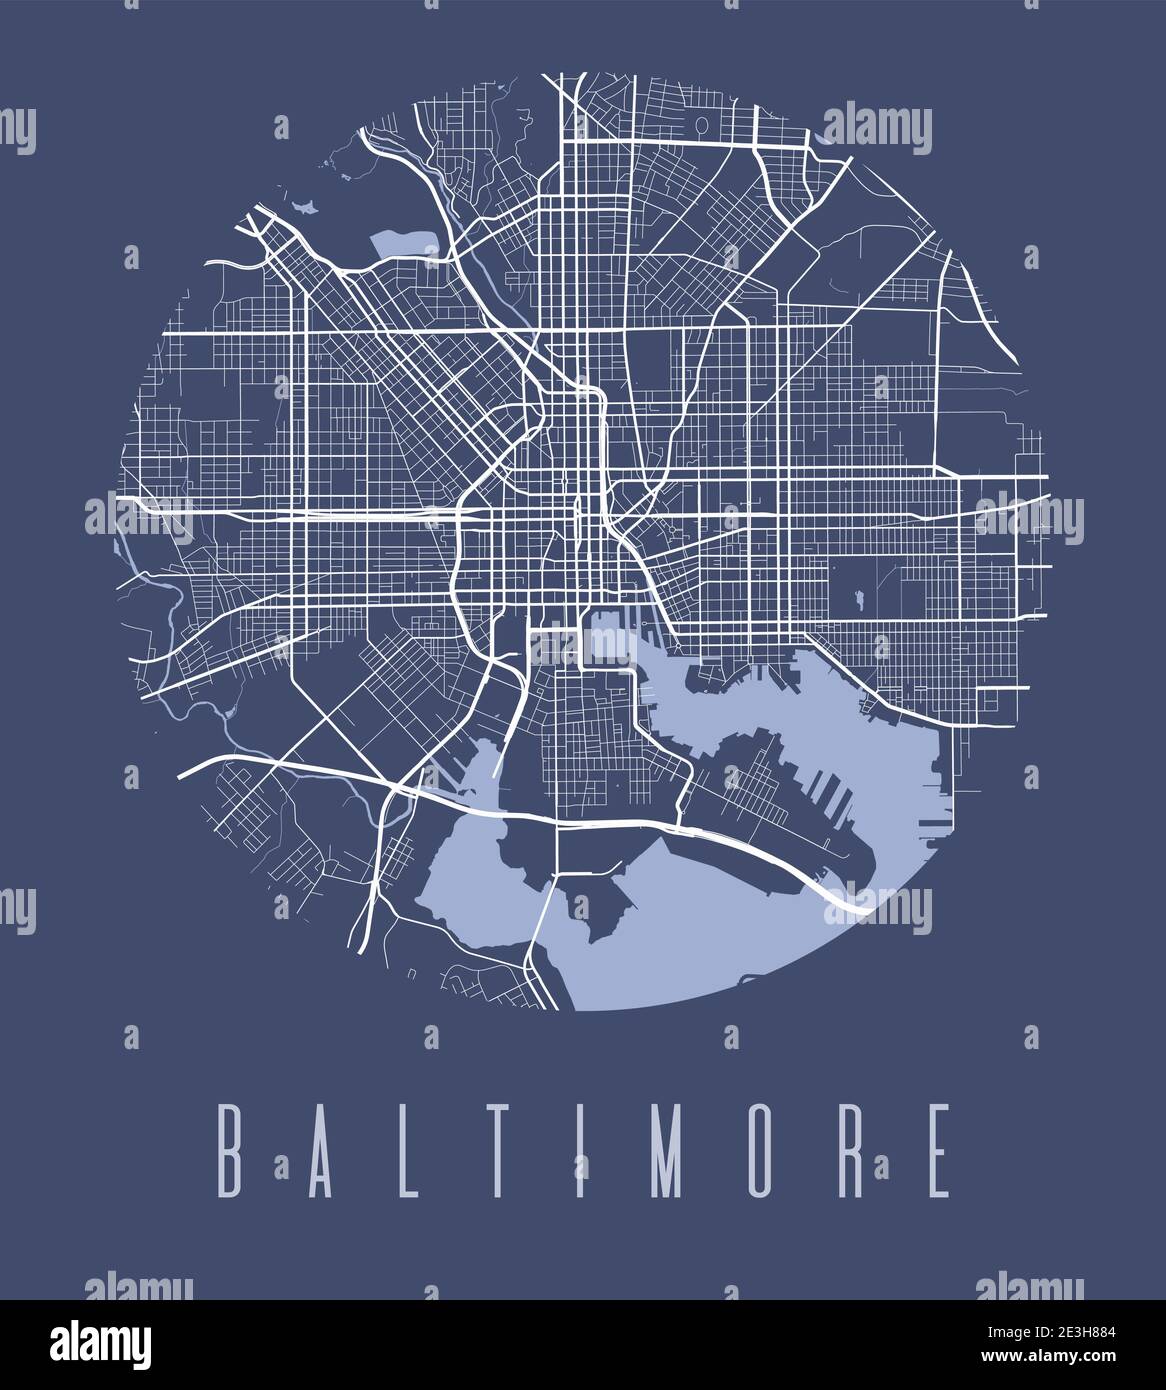 Baltimore map poster. Decorative design street map of Baltimore city. Cityscape aria panorama silhouette aerial view, typography style. Land, river, a Stock Vector